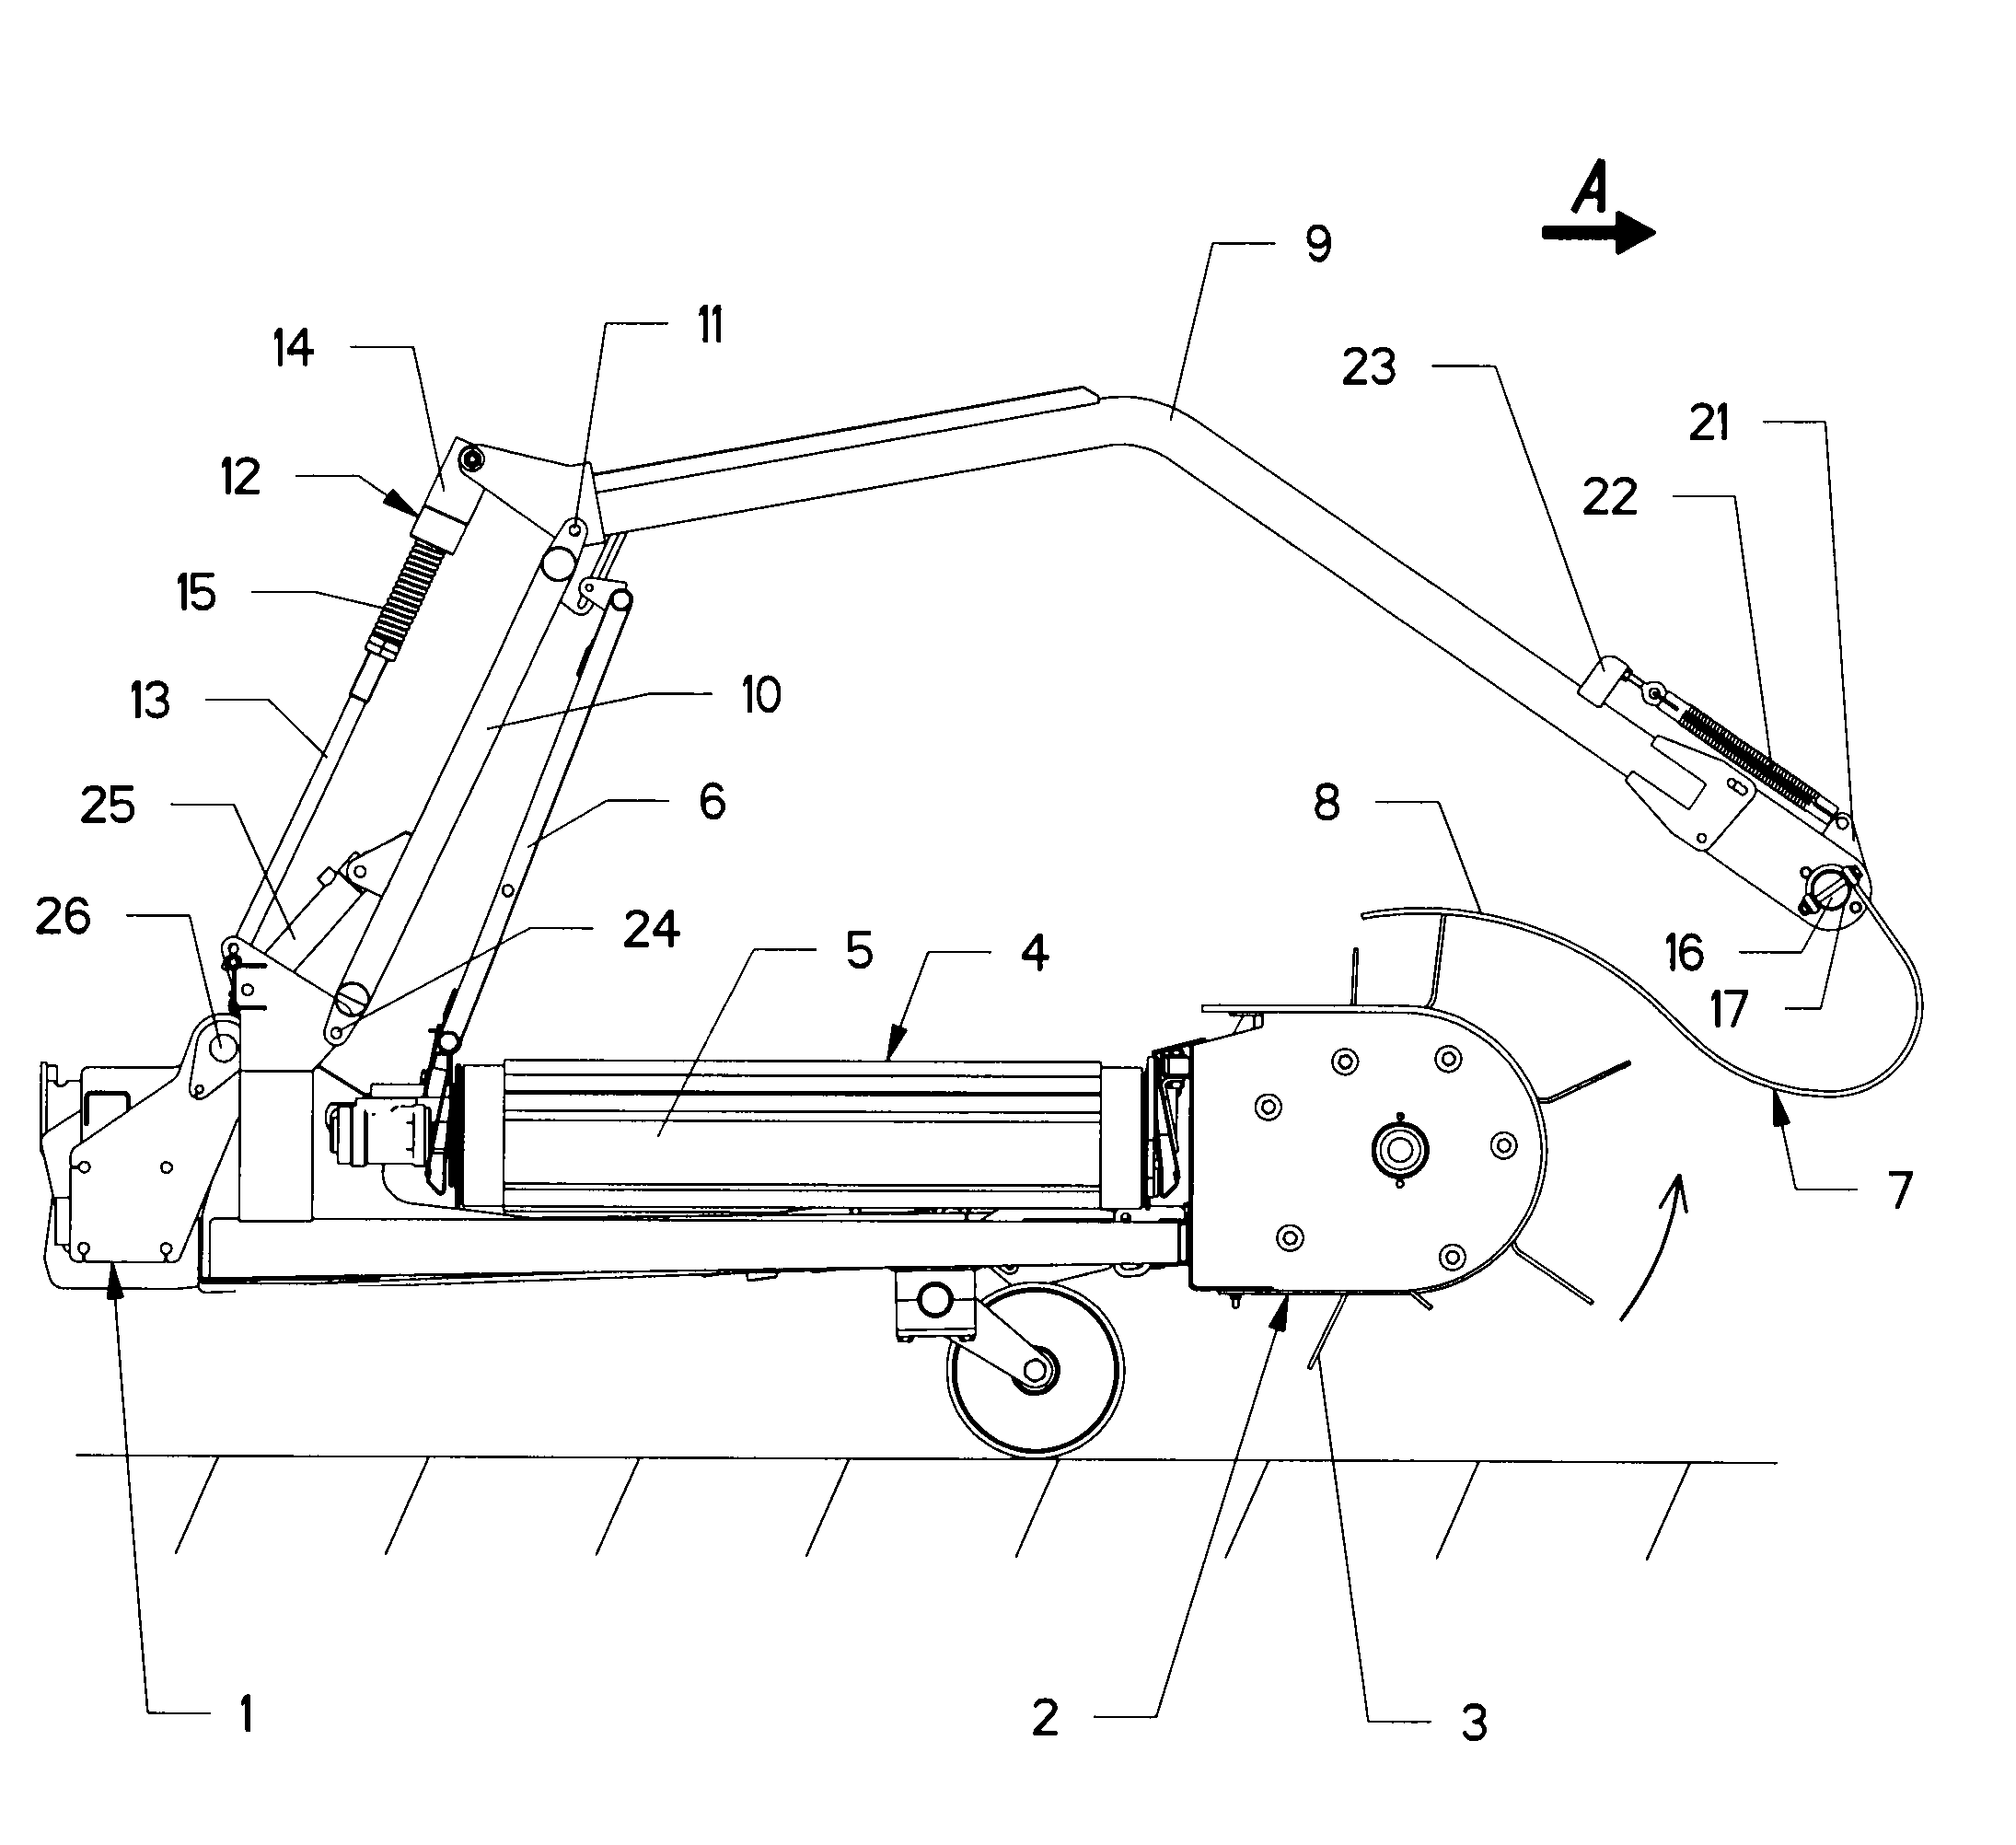 Guiding arrangement for forage pickup device of an agricultural harvester